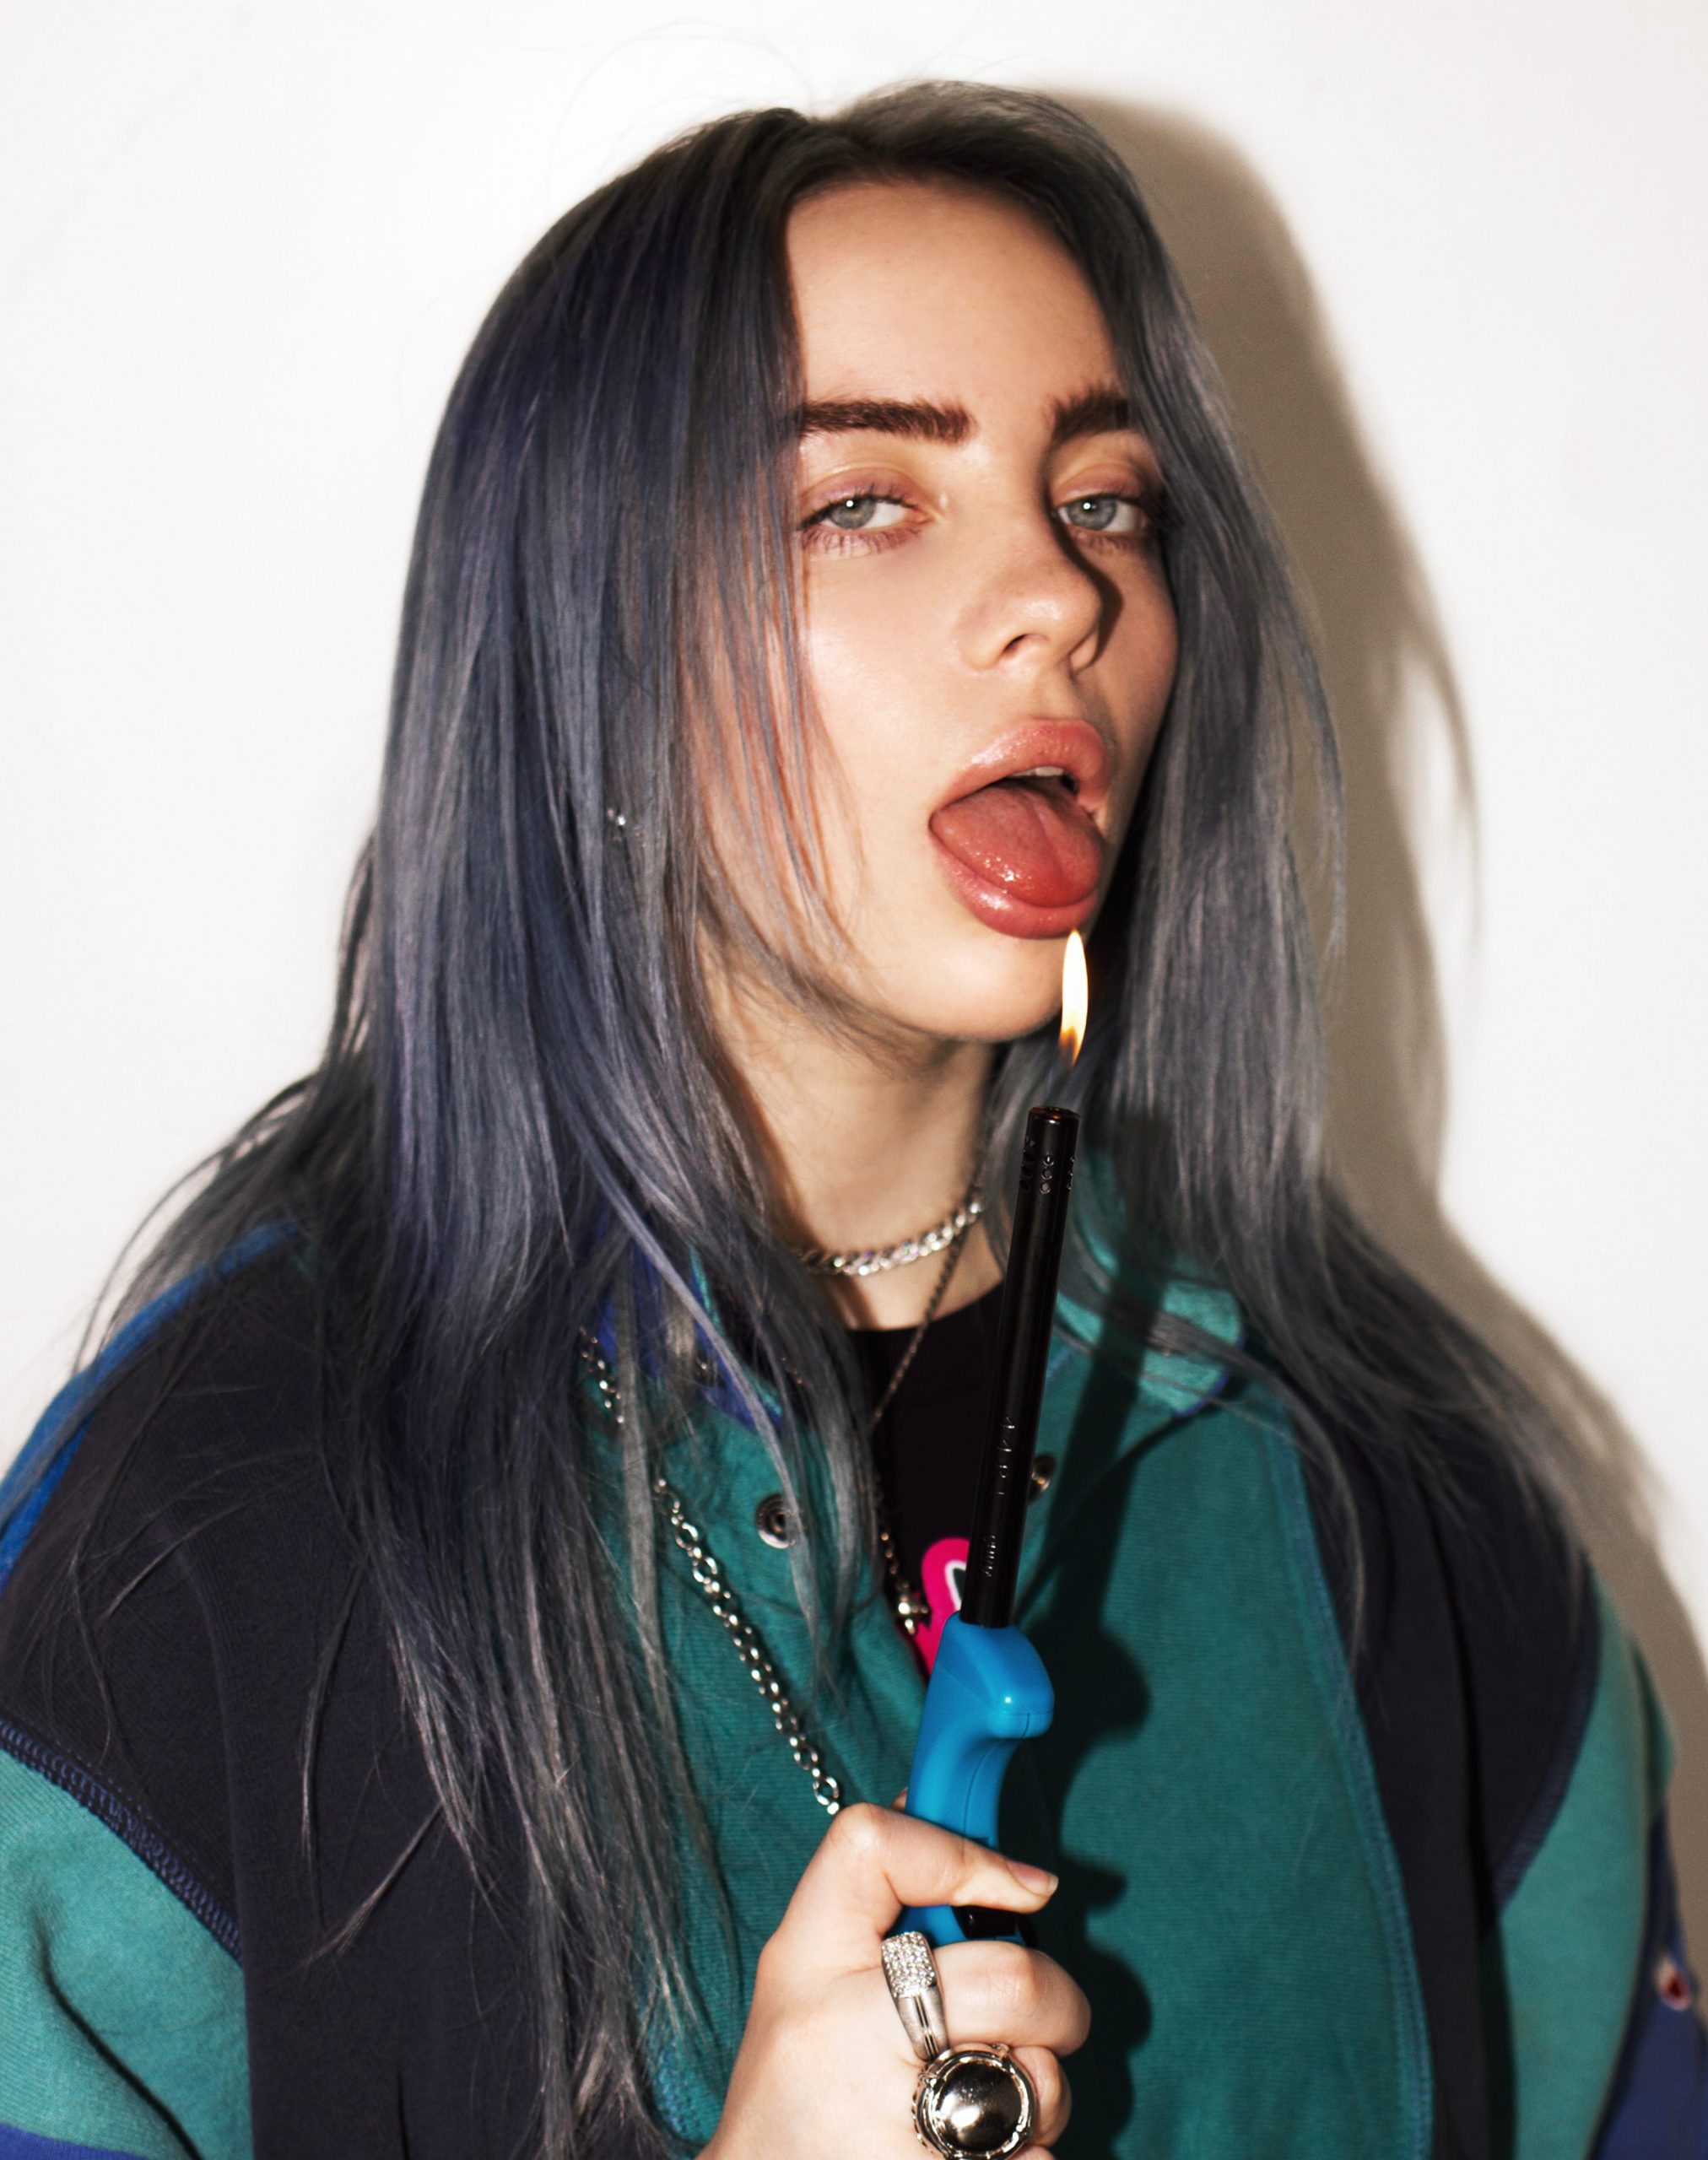 You Will See Her in a Crown: Interview with Billie Eilish